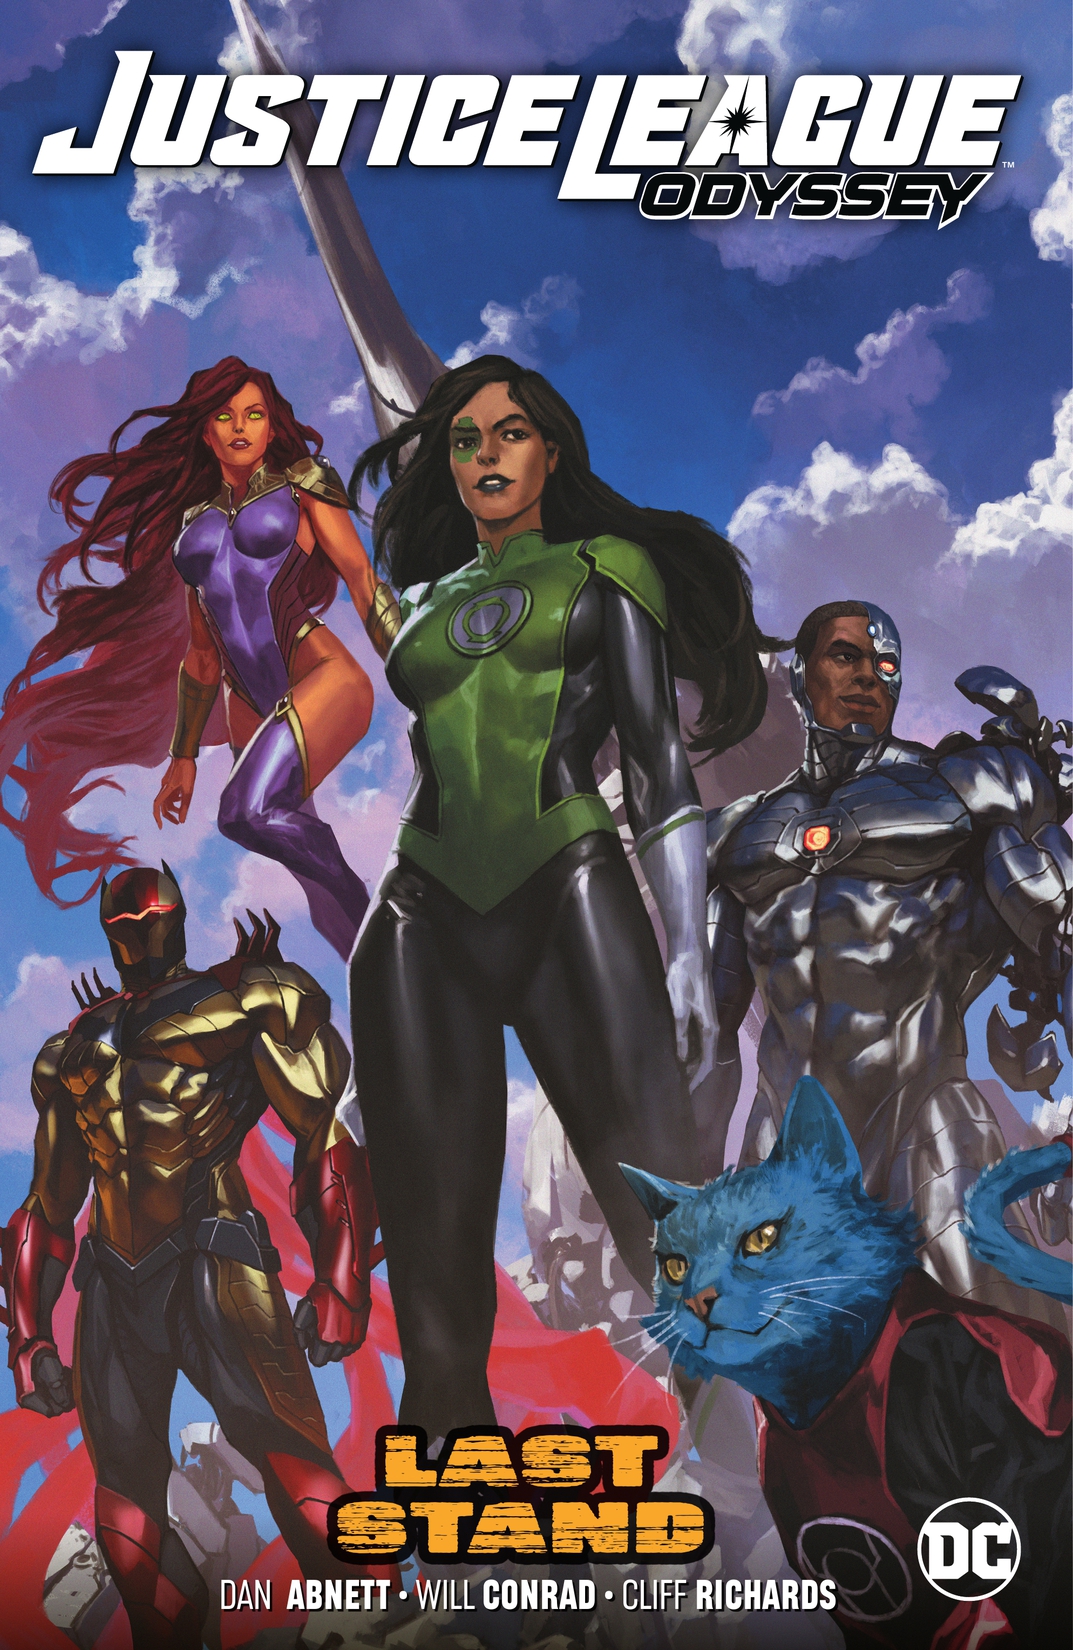 Justice League Odyssey Vol. 4: Last Stand preview images